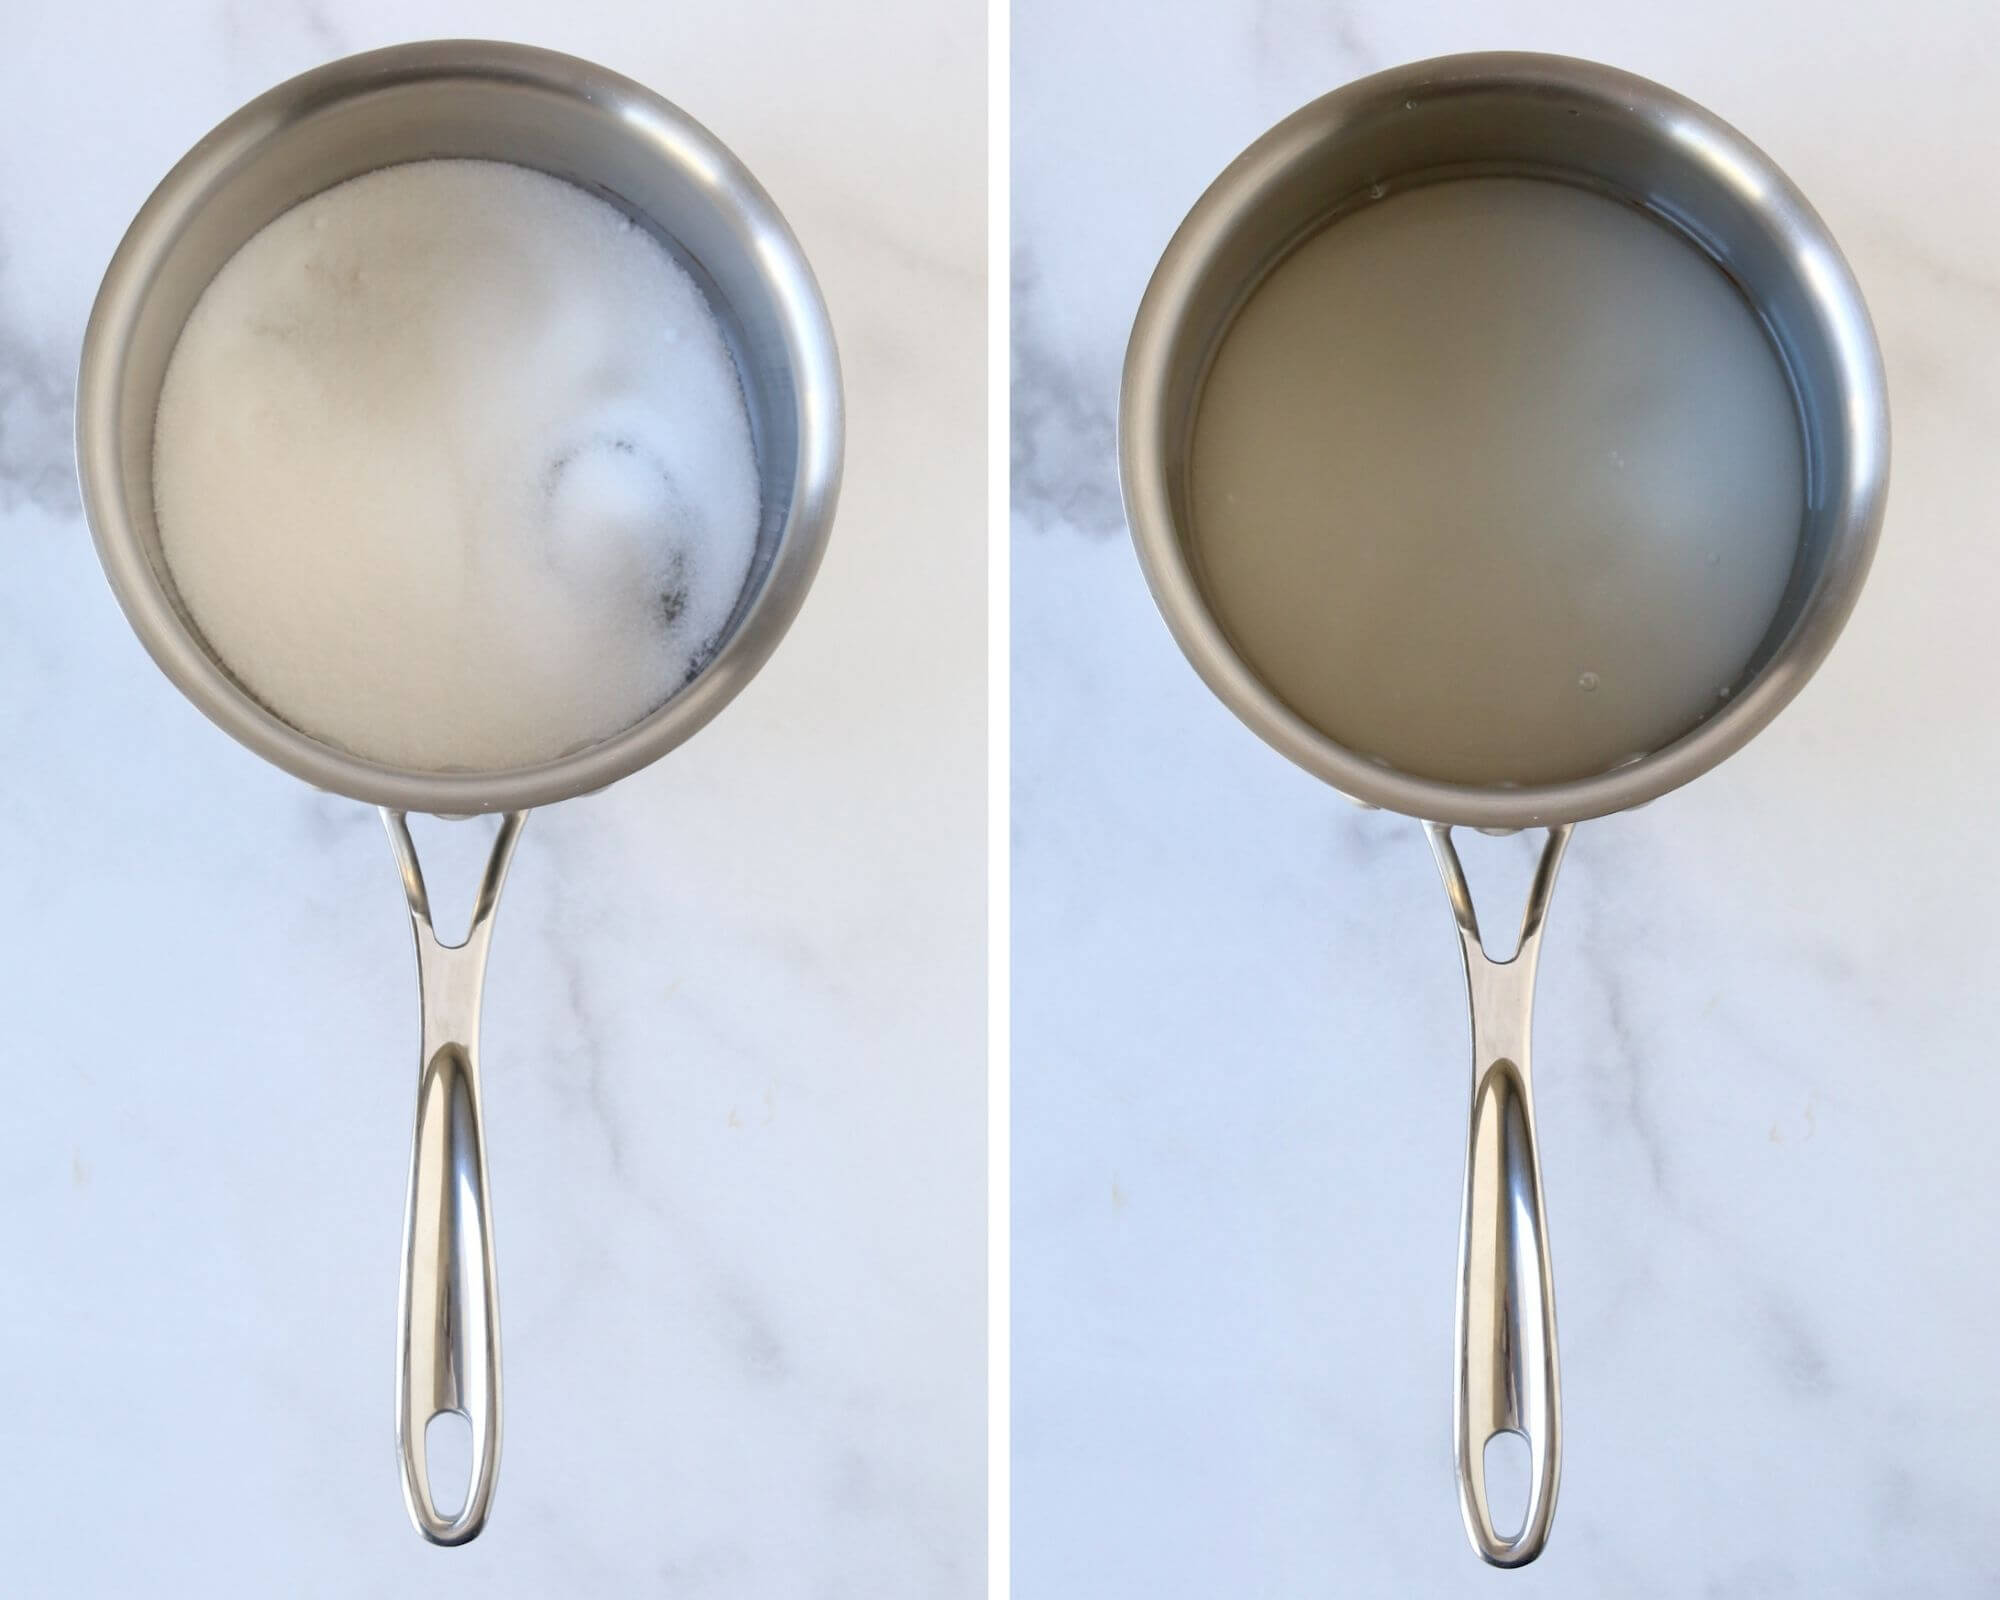 A small saucepan with granulated sugar and water.